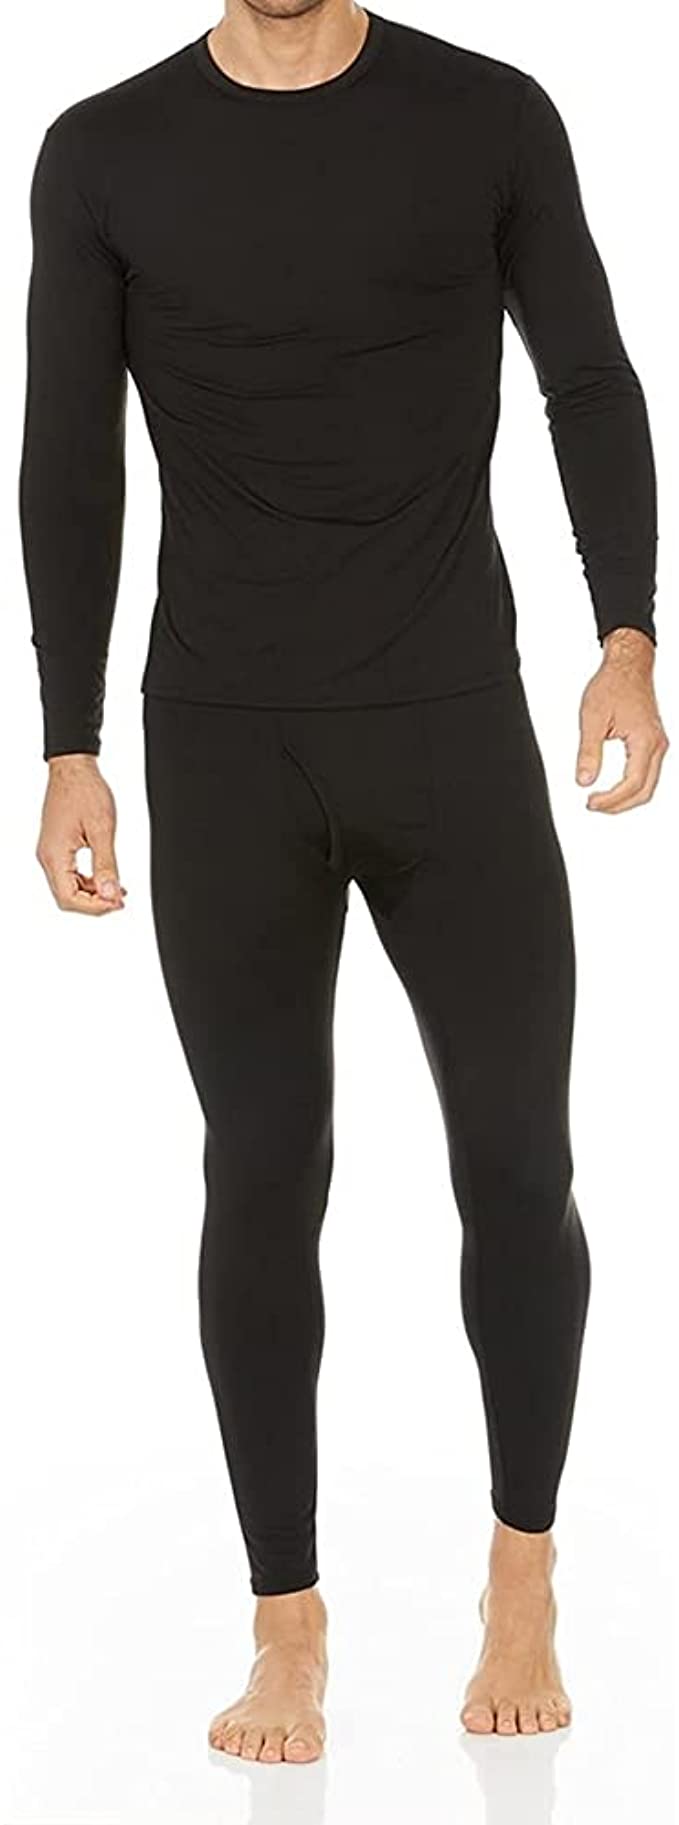 Thermajohn Men Ultra Soft Thermal Underwear Long Johns Set with Fleece Lined